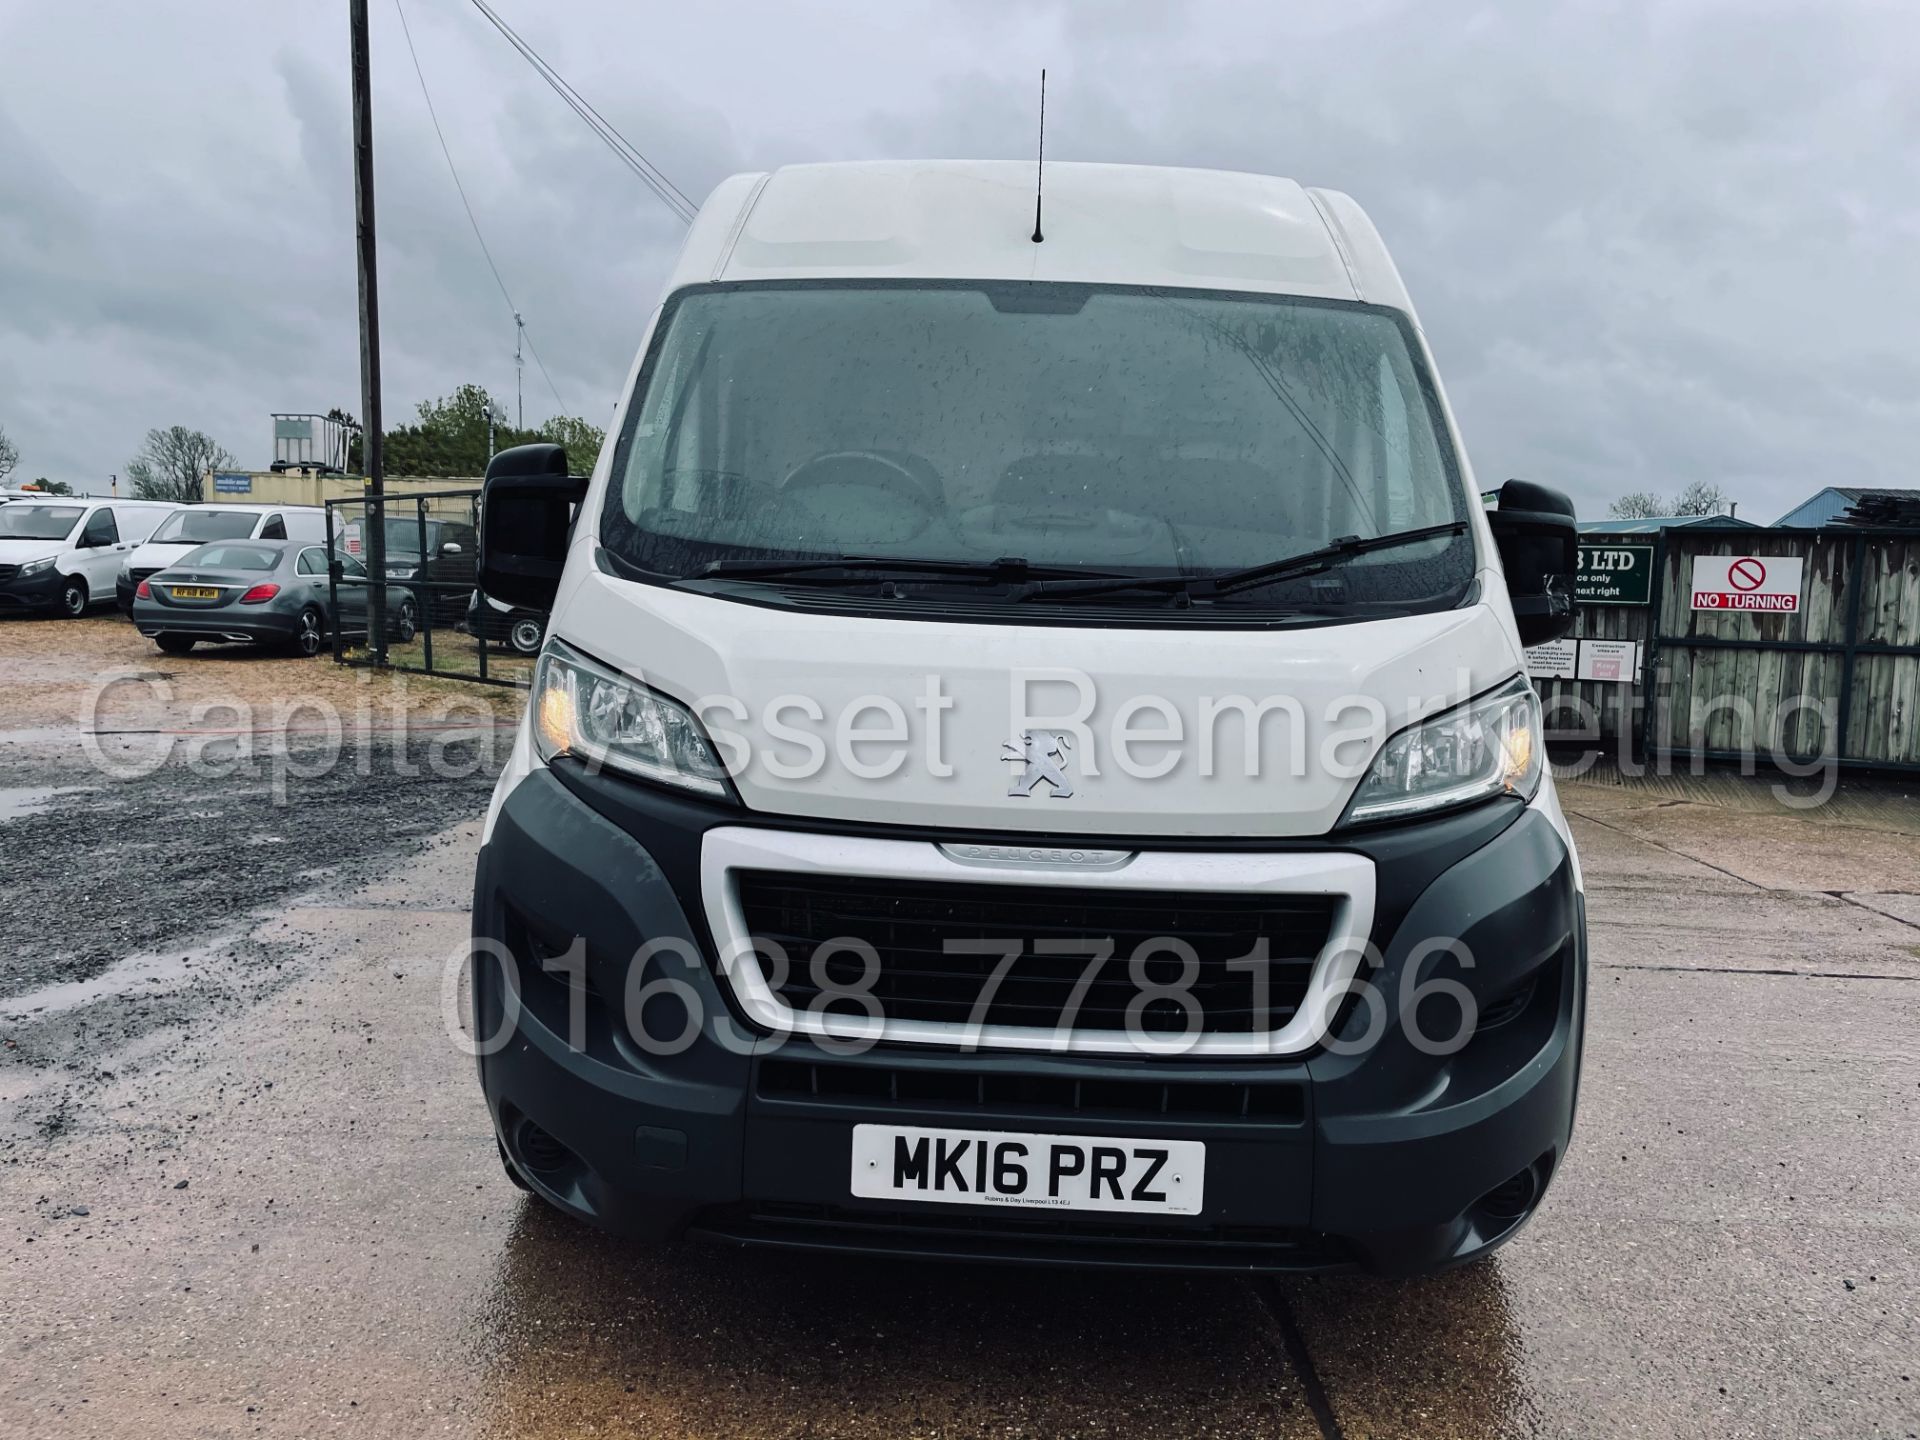 (On Sale) PEUGEOT BOXER 335 *PROFESSIONAL* LWB HI-ROOF (2016) '2.2 HDI - 6 SPEED' *A/C* (1 OWNER) - Image 4 of 41